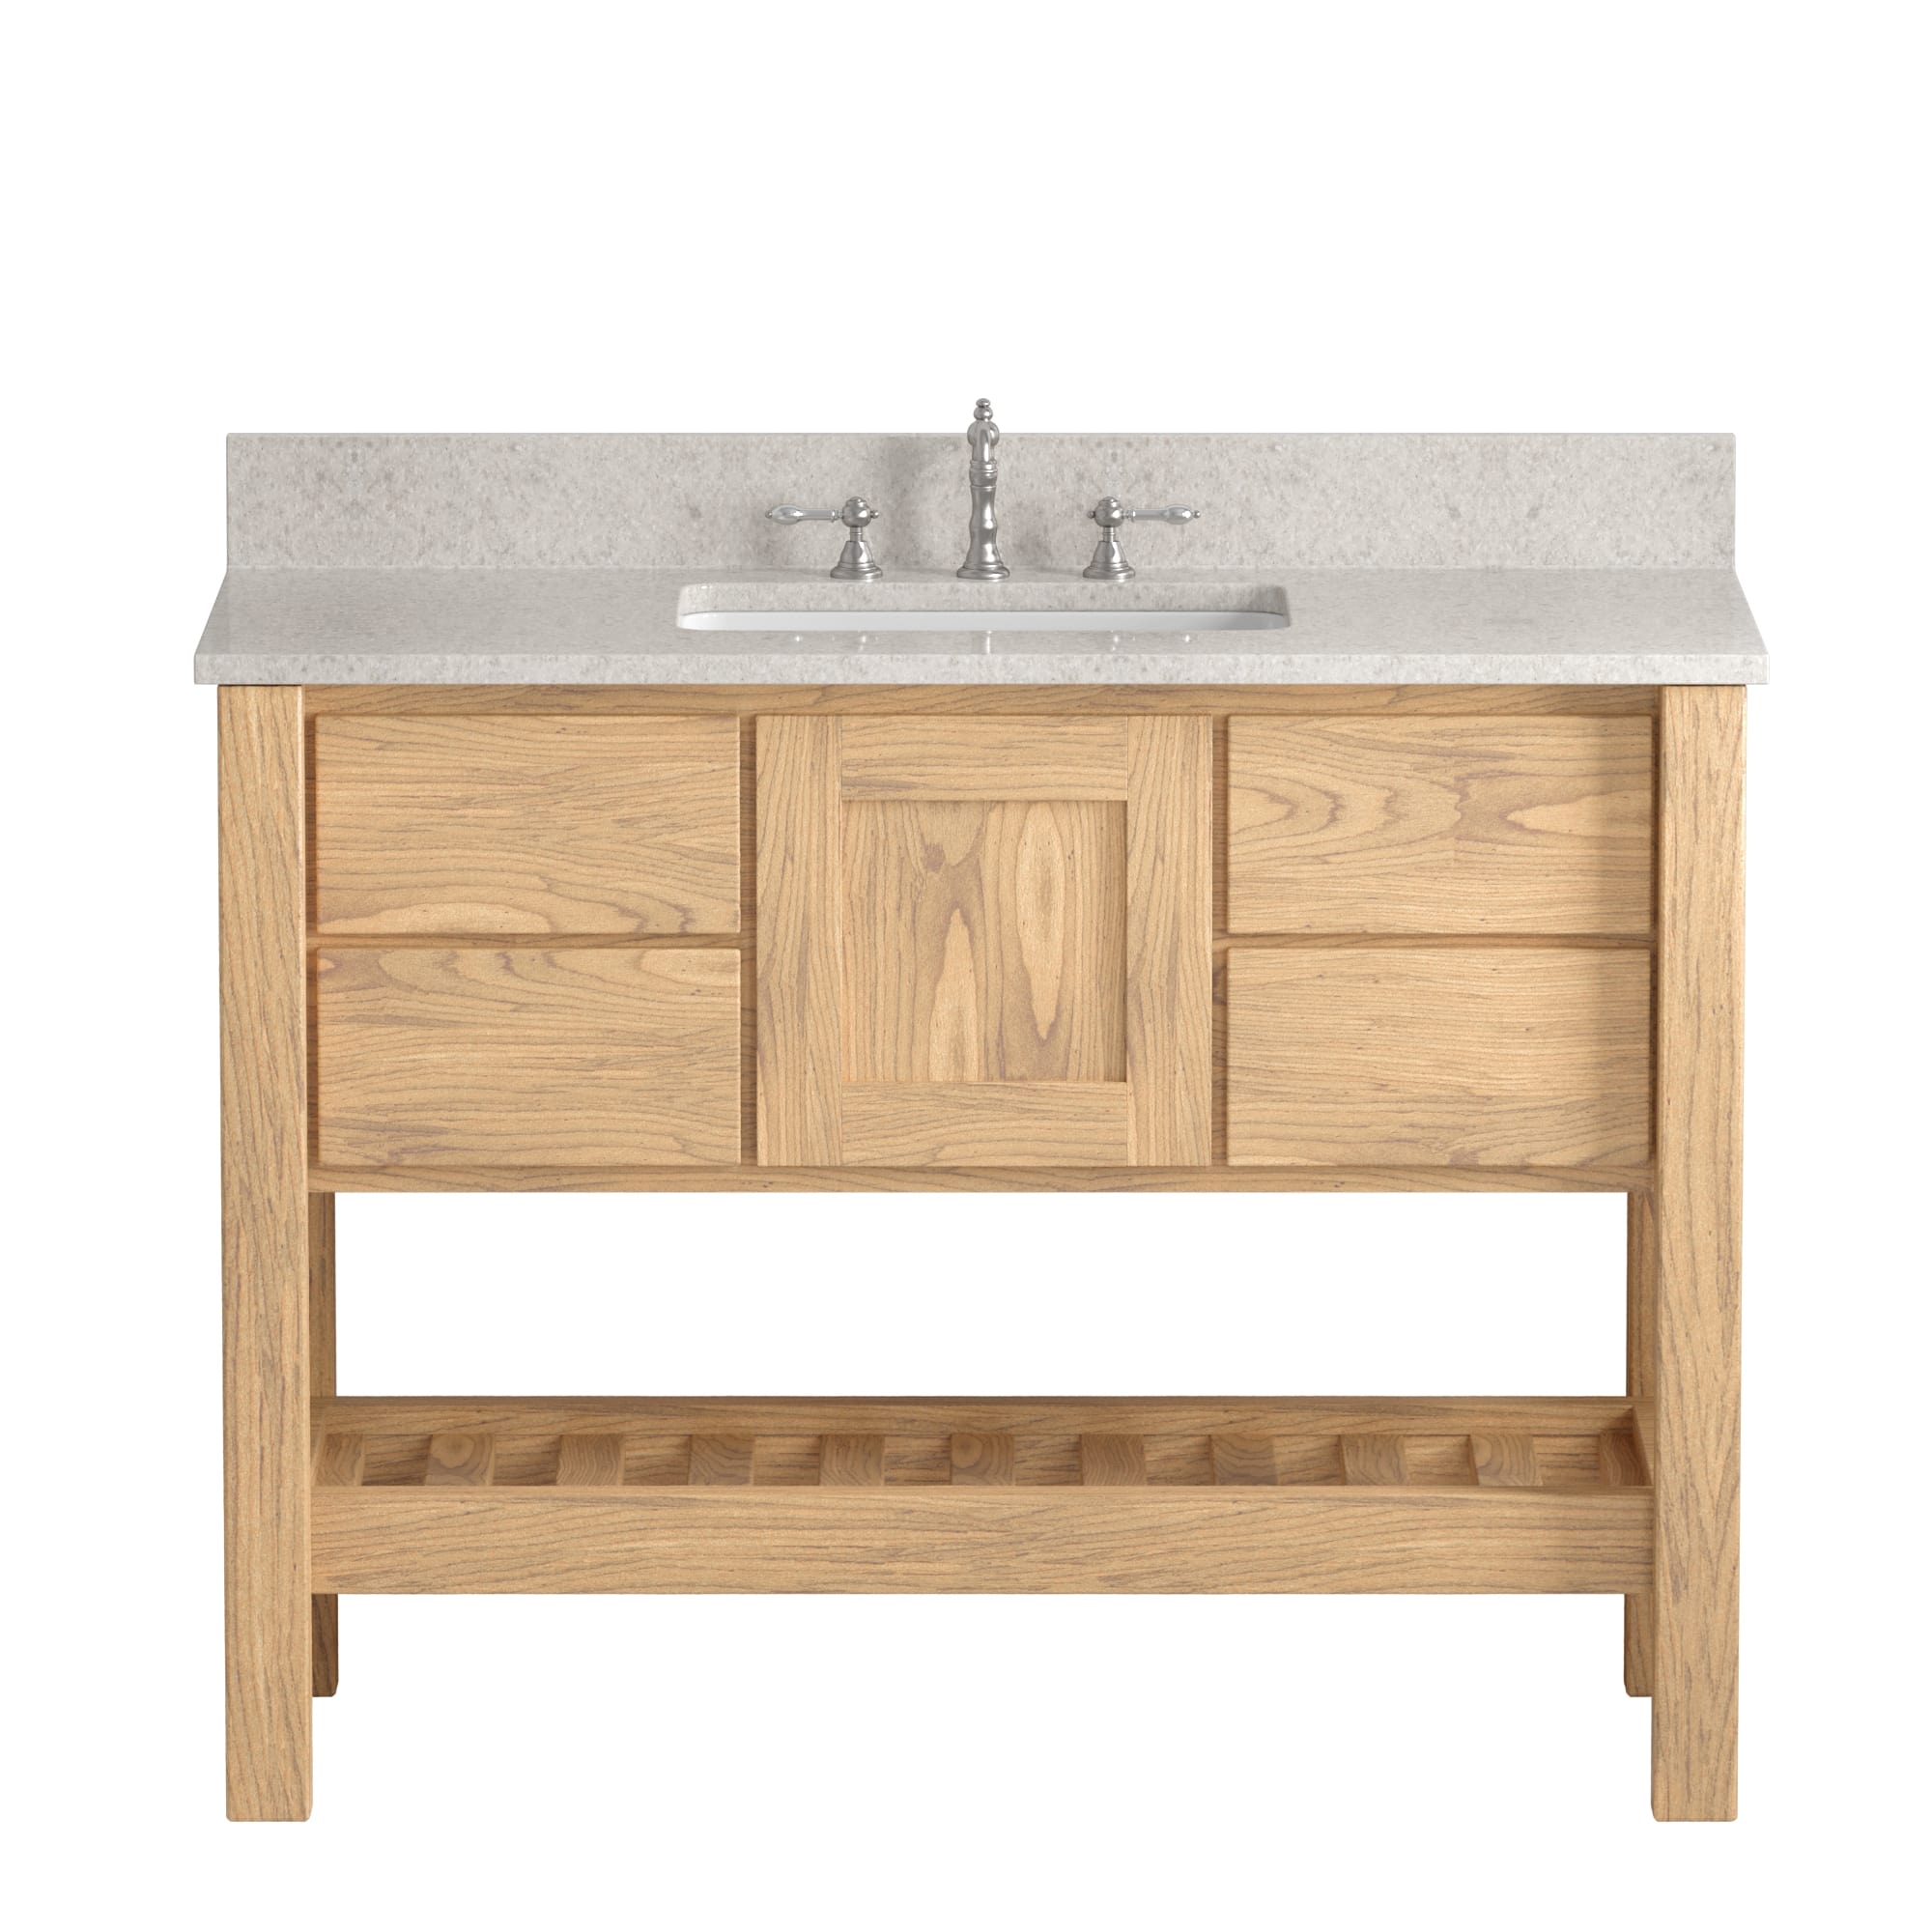 Made in USA, 48" Natural Wood Solid Wood and Basin Sink Vanity with Countertop Options